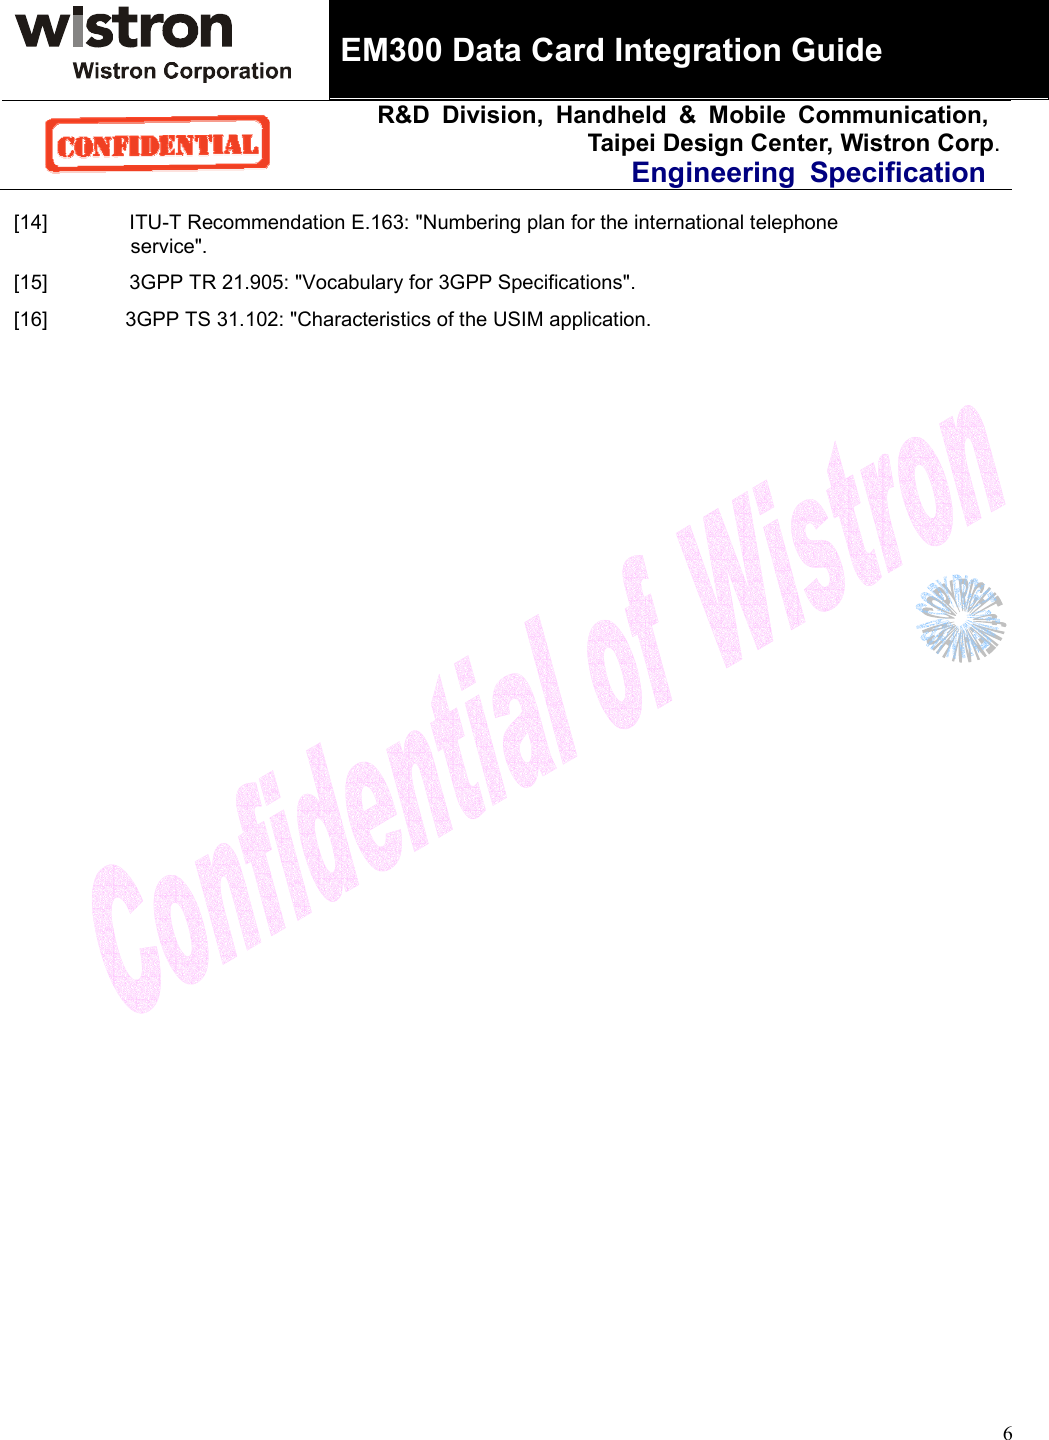 EM300 Data Card Integration GuideR&amp;D Division, Handheld &amp; Mobile Communication, Taipei Design Center, Wistron Corp.Engineering Specification  6[14]  ITU-T Recommendation E.163: &quot;Numbering plan for the international telephone service&quot;. [15]  3GPP TR 21.905: &quot;Vocabulary for 3GPP Specifications&quot;. [16]  3GPP TS 31.102: &quot;Characteristics of the USIM application.